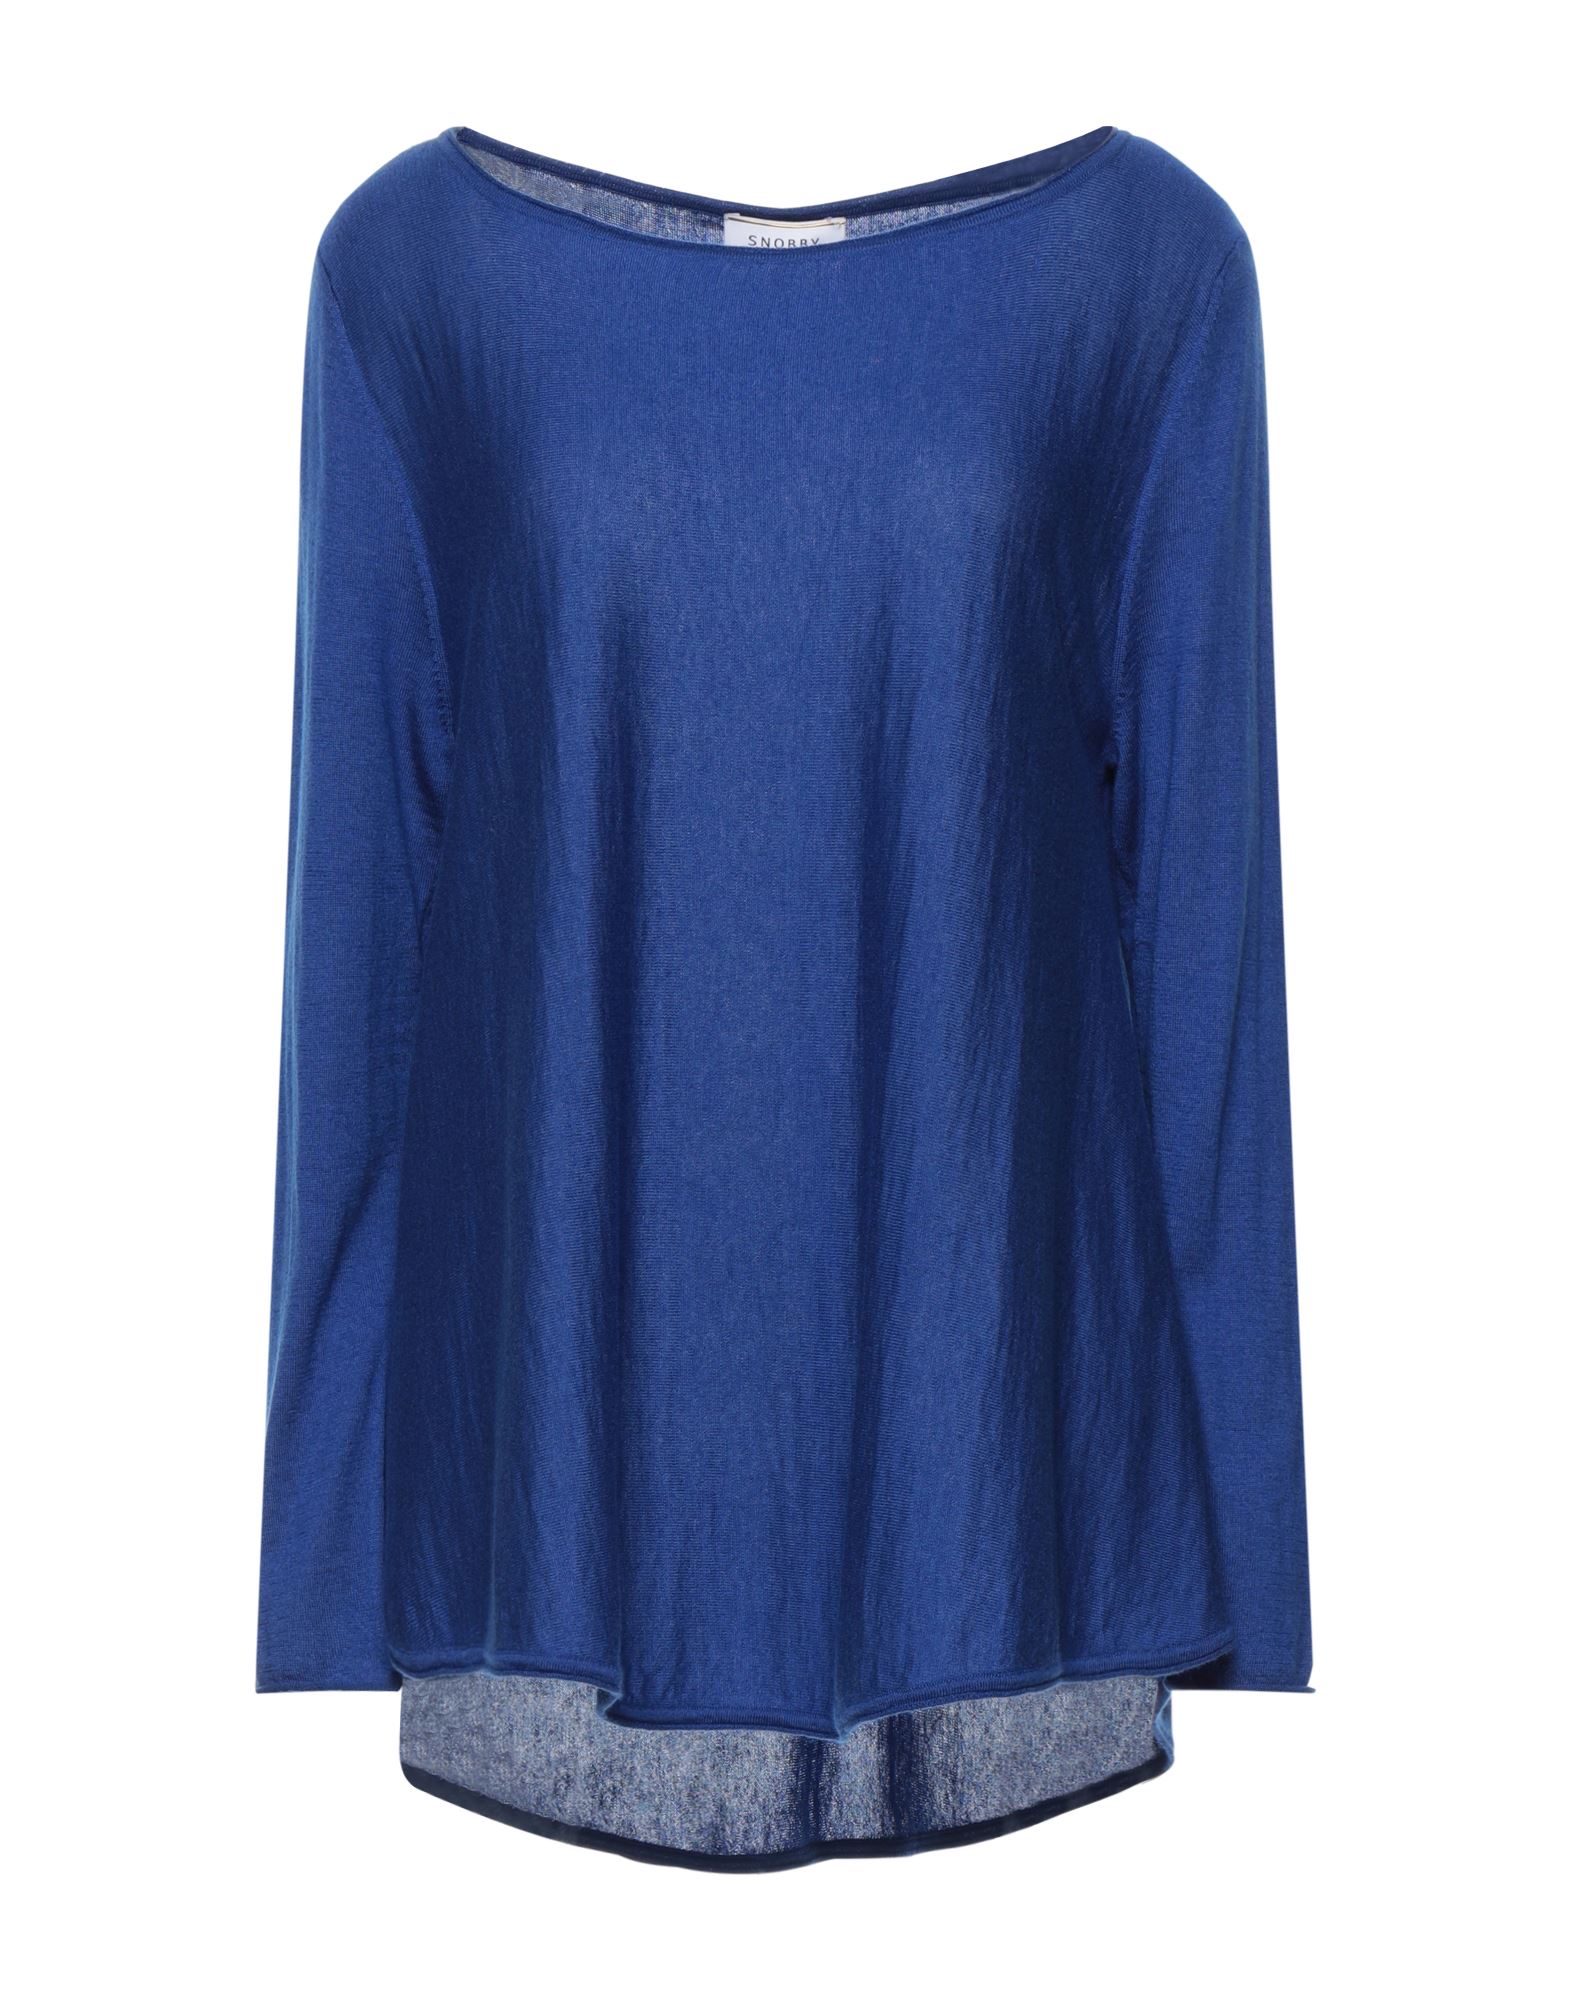 Snobby Sheep Sweaters In Bright Blue